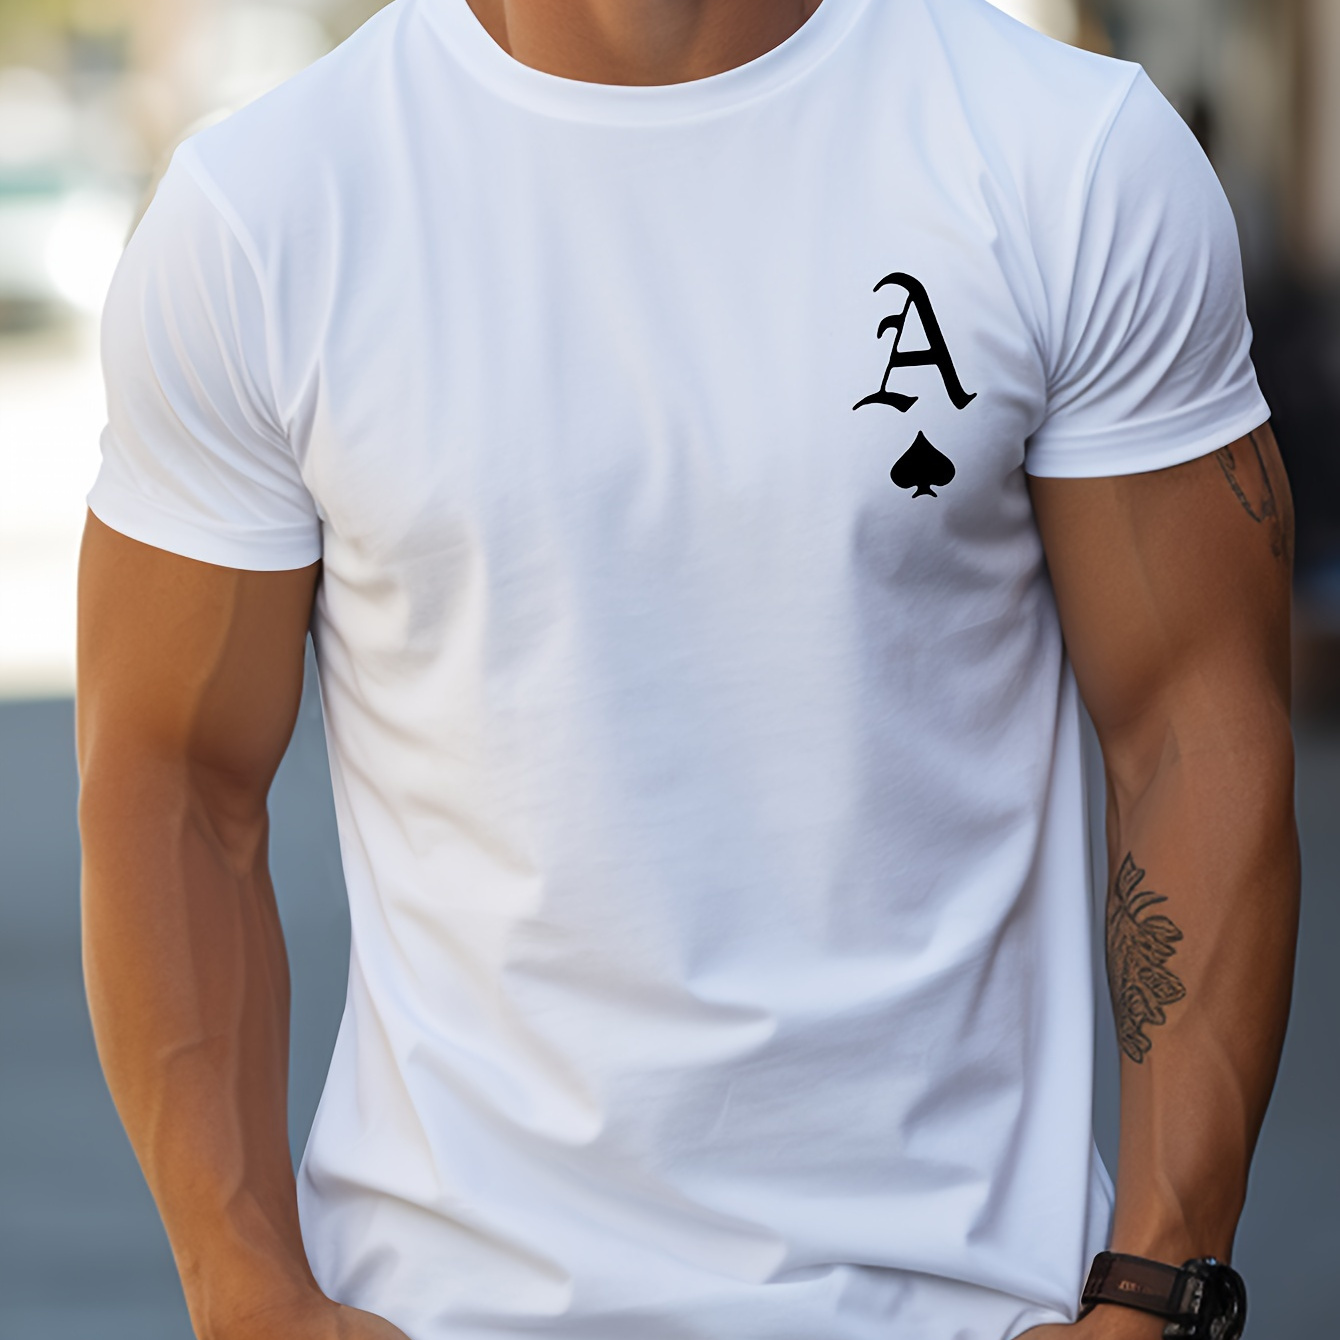 

Ace Of Spades Print T Shirt, Tees For Men, Casual Short Sleeve Tshirt For Summer Spring Fall, Tops As Gifts